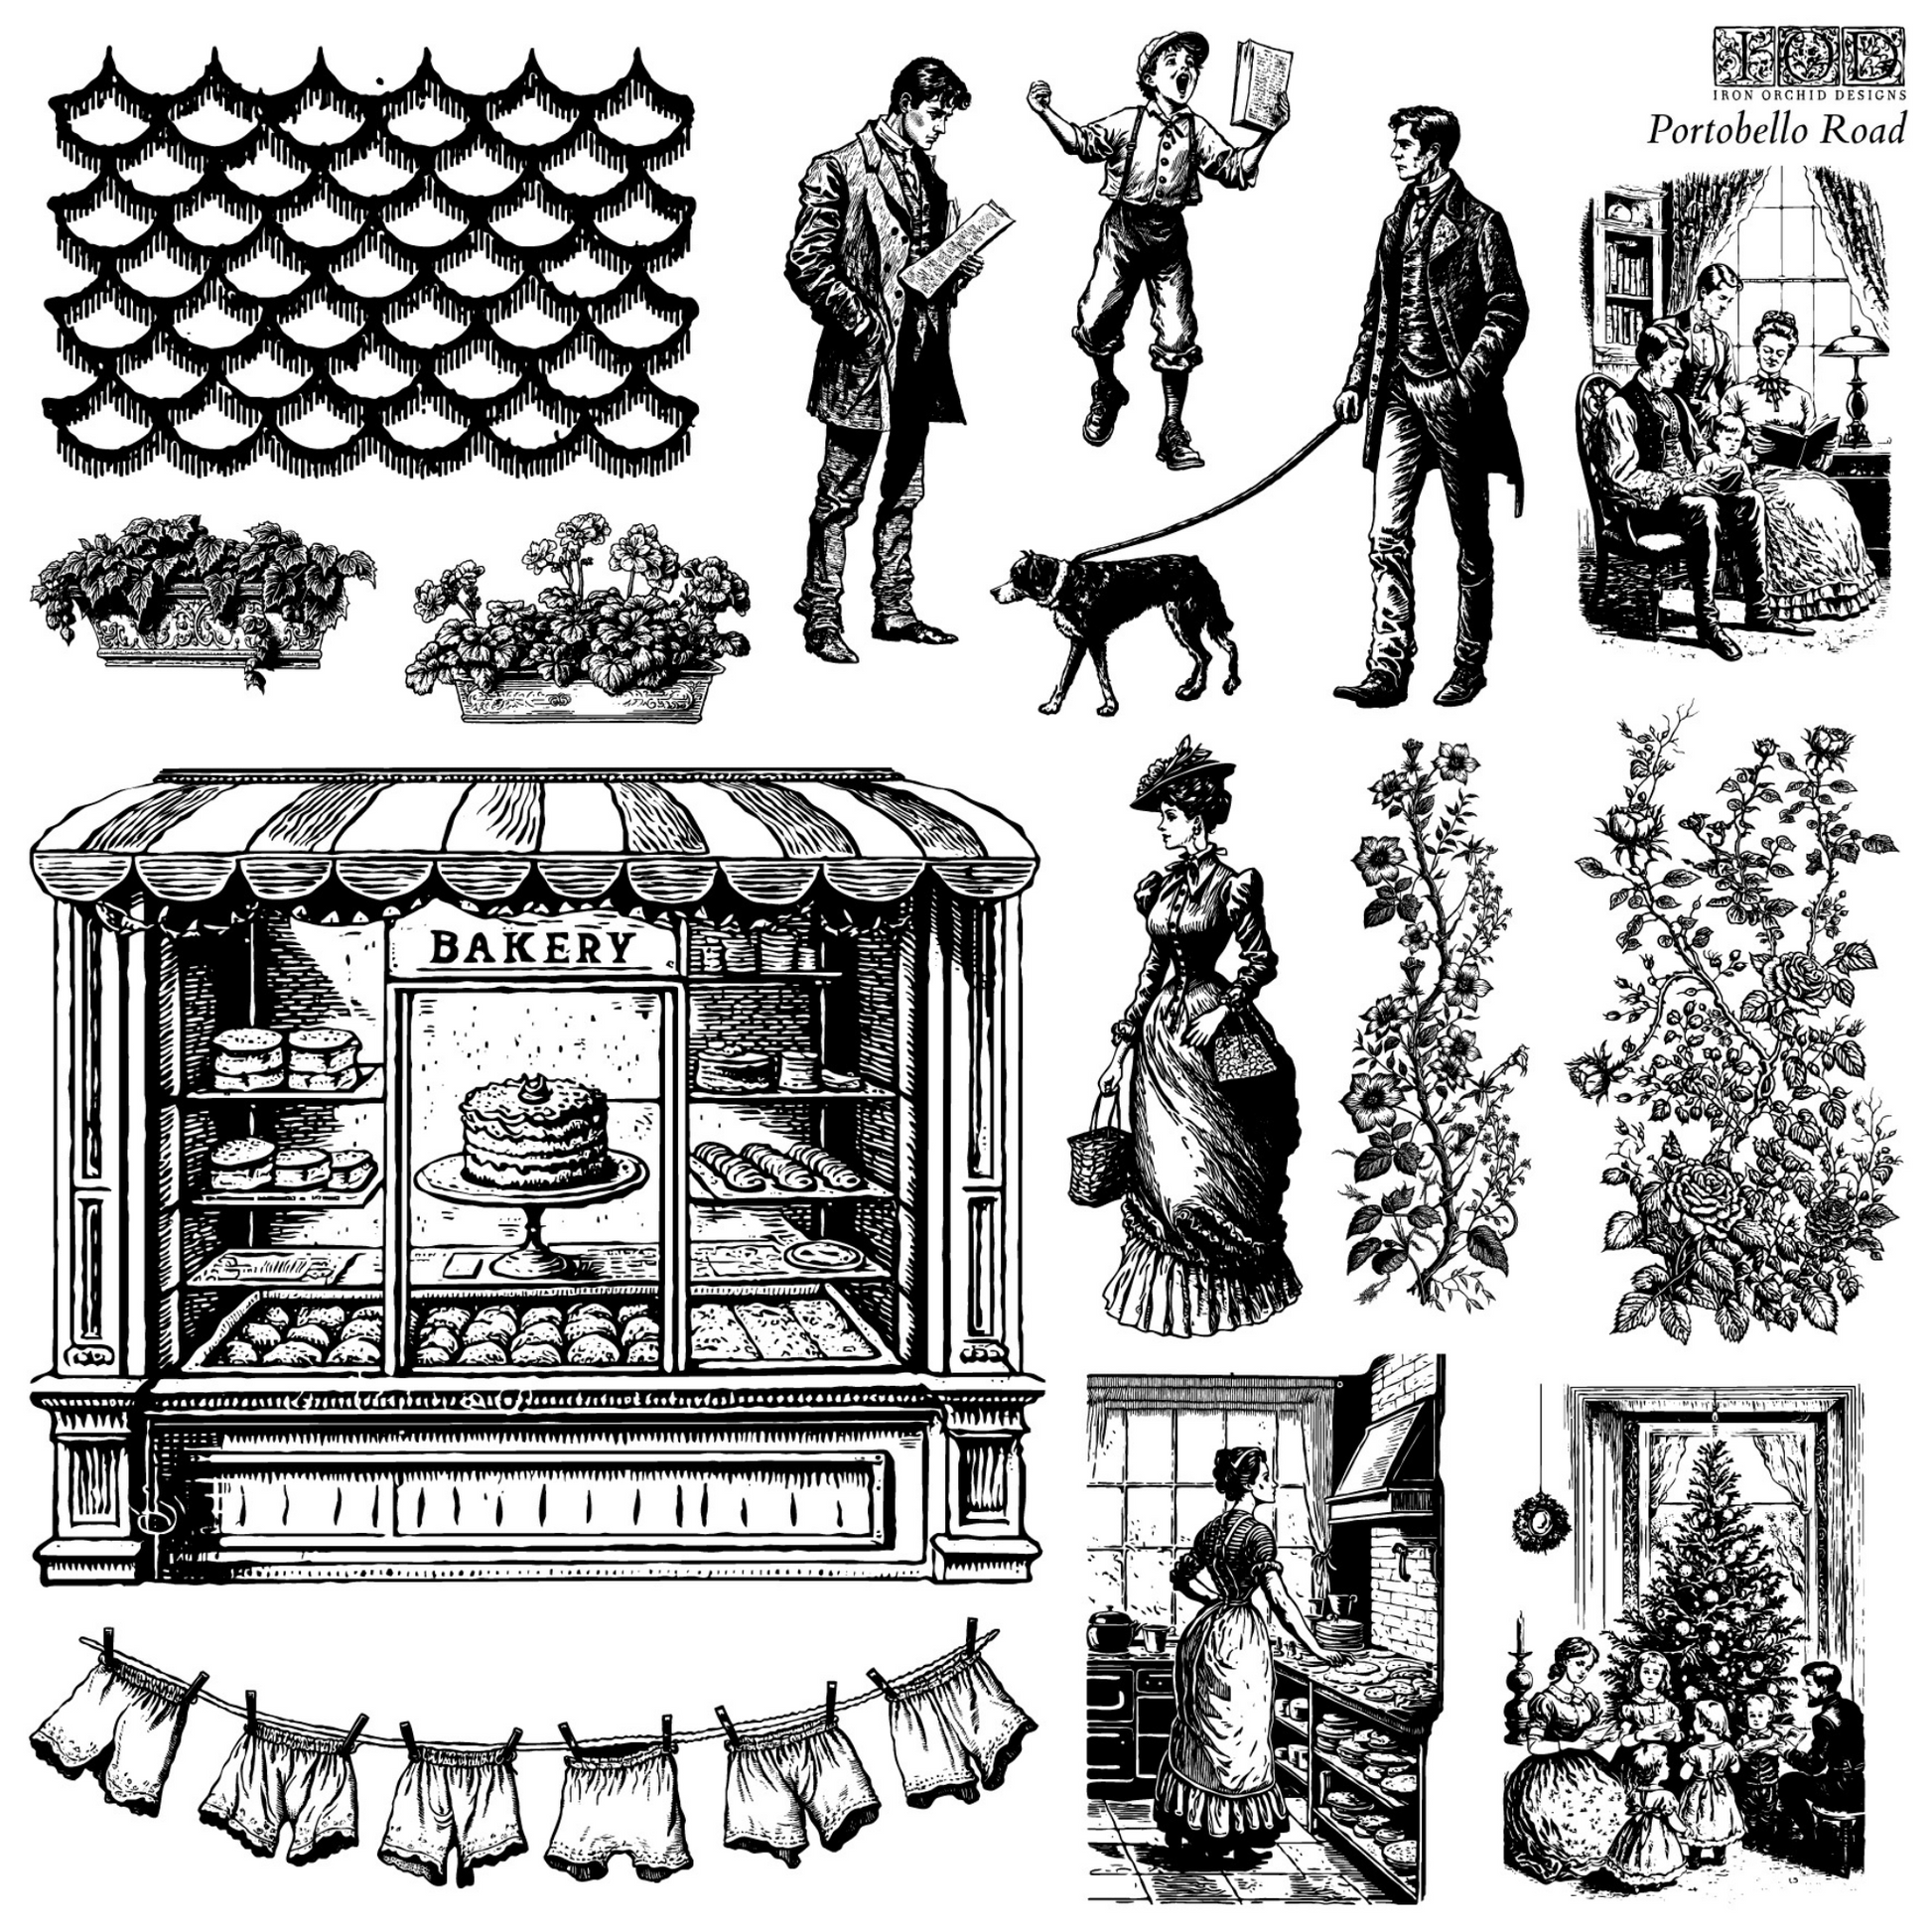 "Portobello Road" IOD Stamps by Iron Orchid Designs. Sheet 2 of 2 sheet stamp set available at Milton's Daughter.